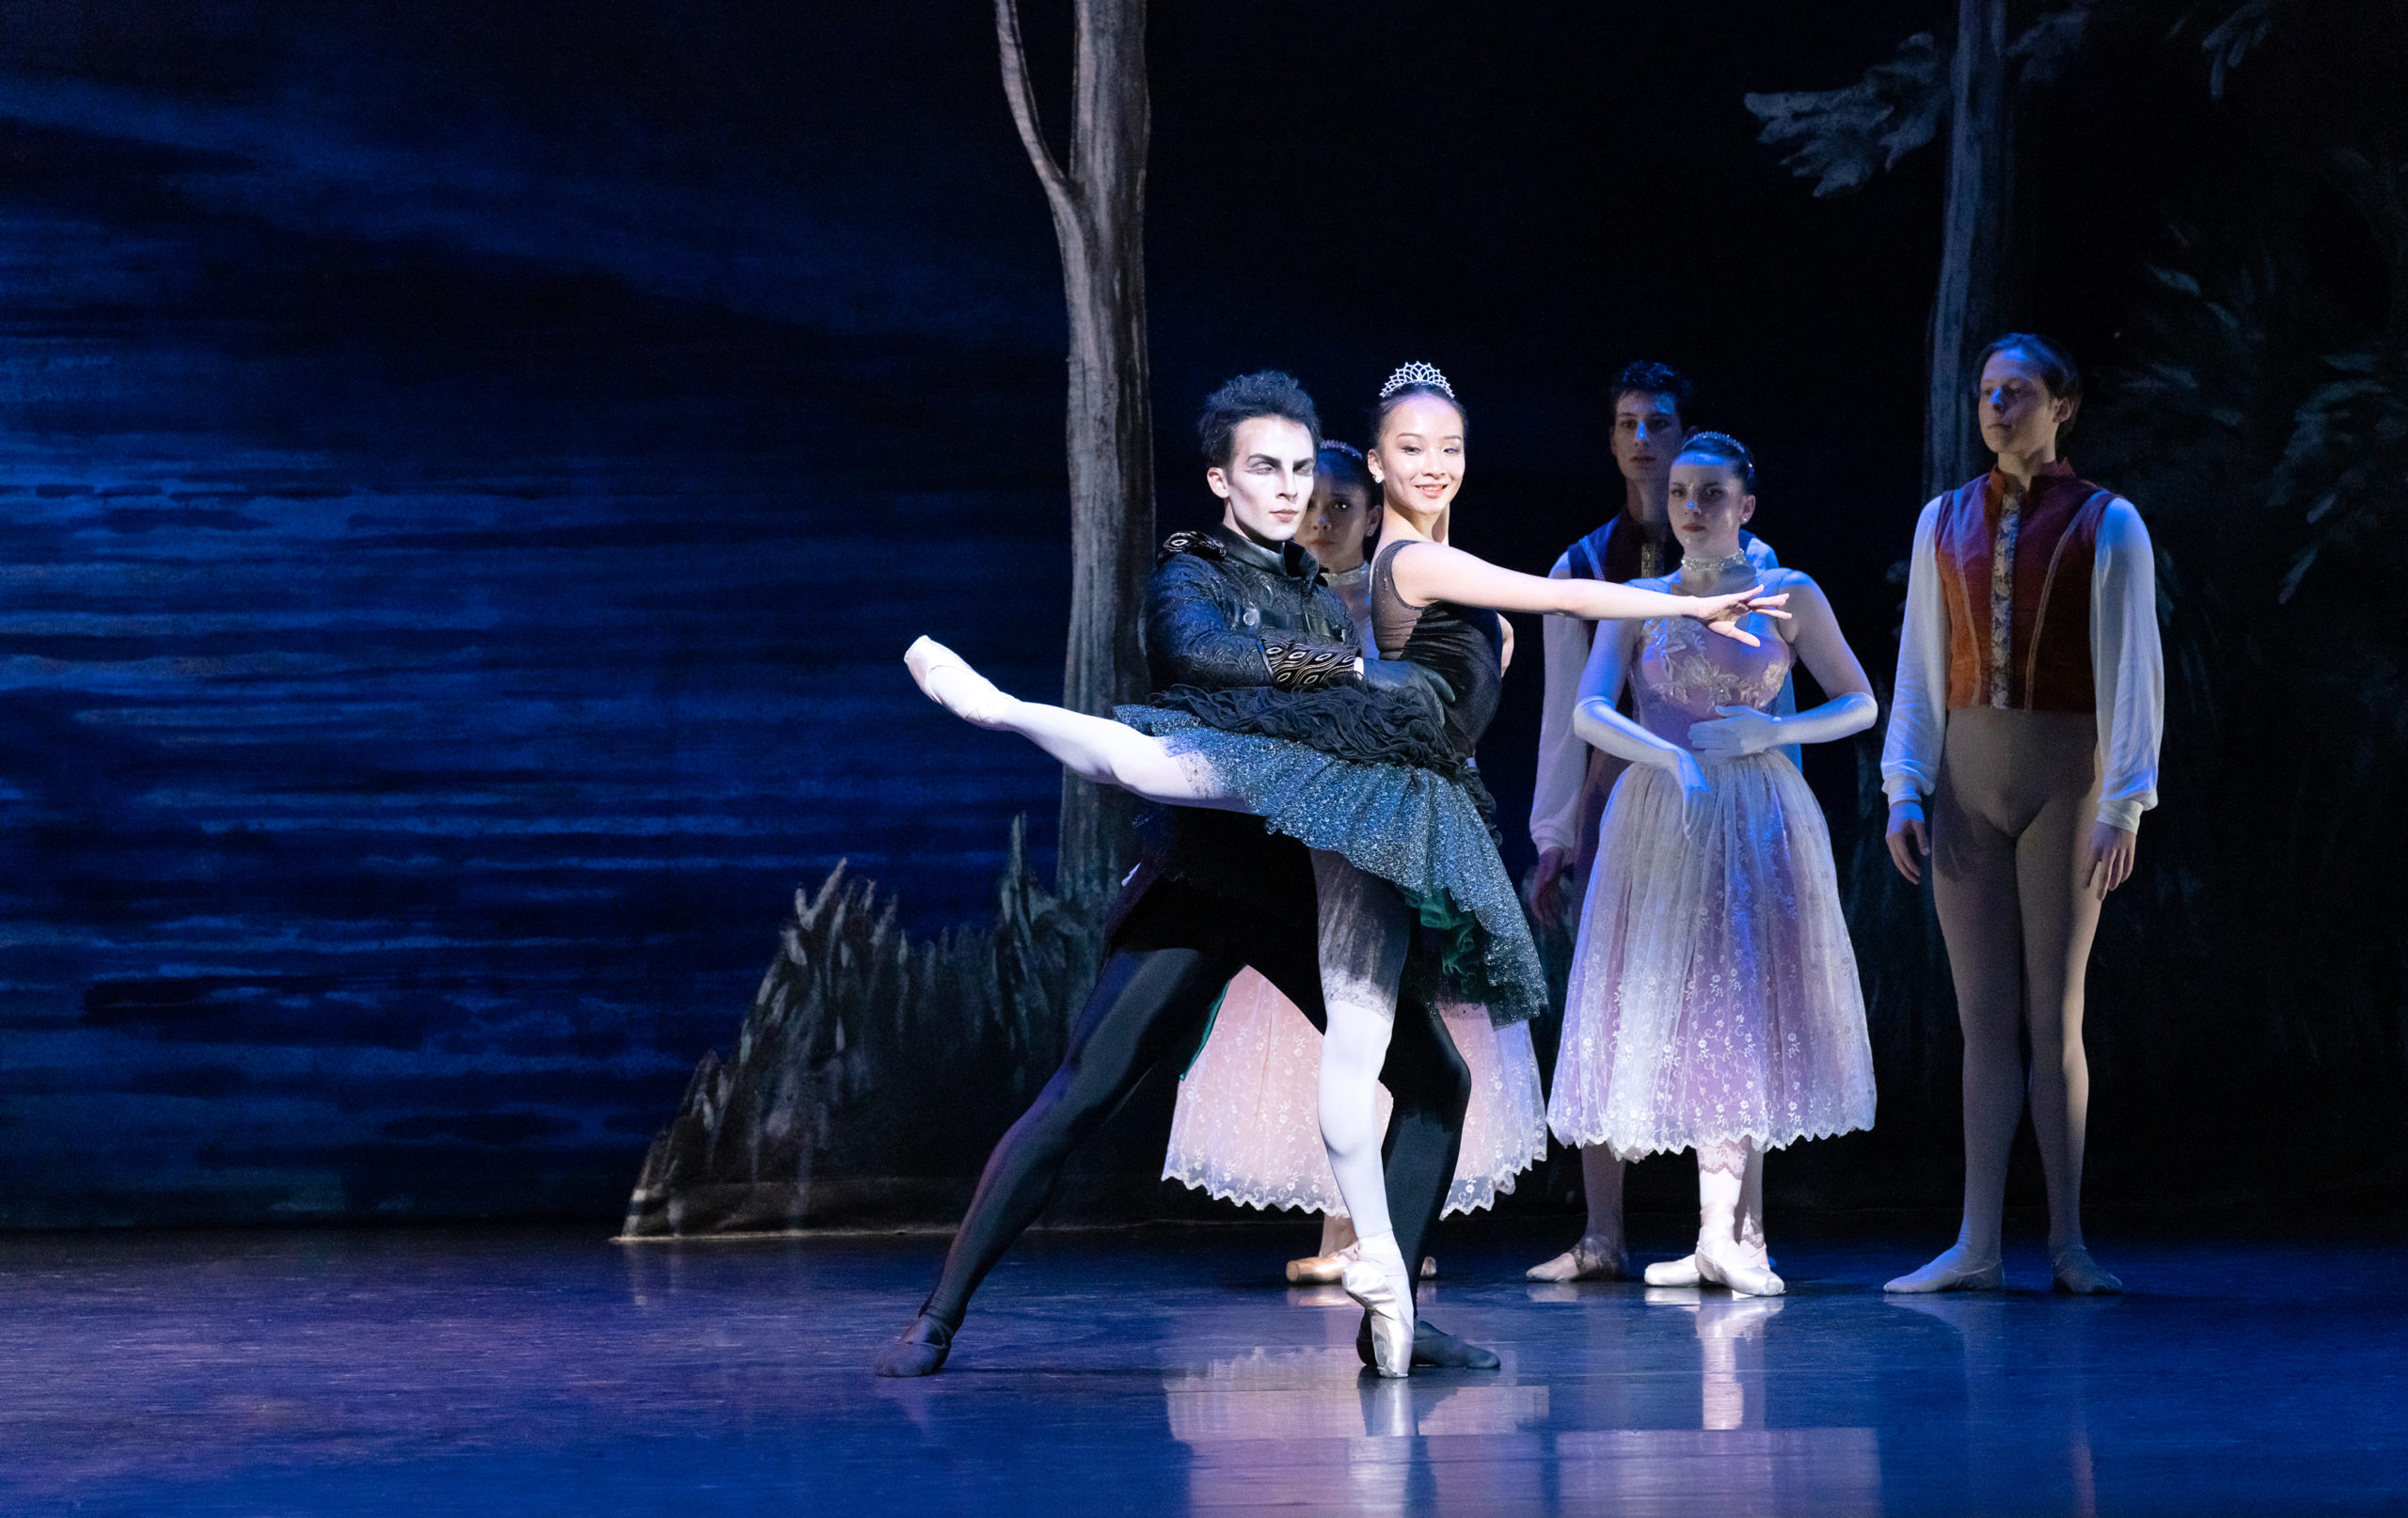 Hui Wen Peng and Carraig New perform "Swan Lake" onstage. Peng wears a black tutu embellised with black feathers, a tiara, pink tights and pointe shoes and poses in attitude effacé with her right leg back and her right arm across the front of her body. Cruz Alvarez stands behind her, dressed all in black and with dramatic makeup on, and holds her waist. Behind them, other dancers in costumes watch.